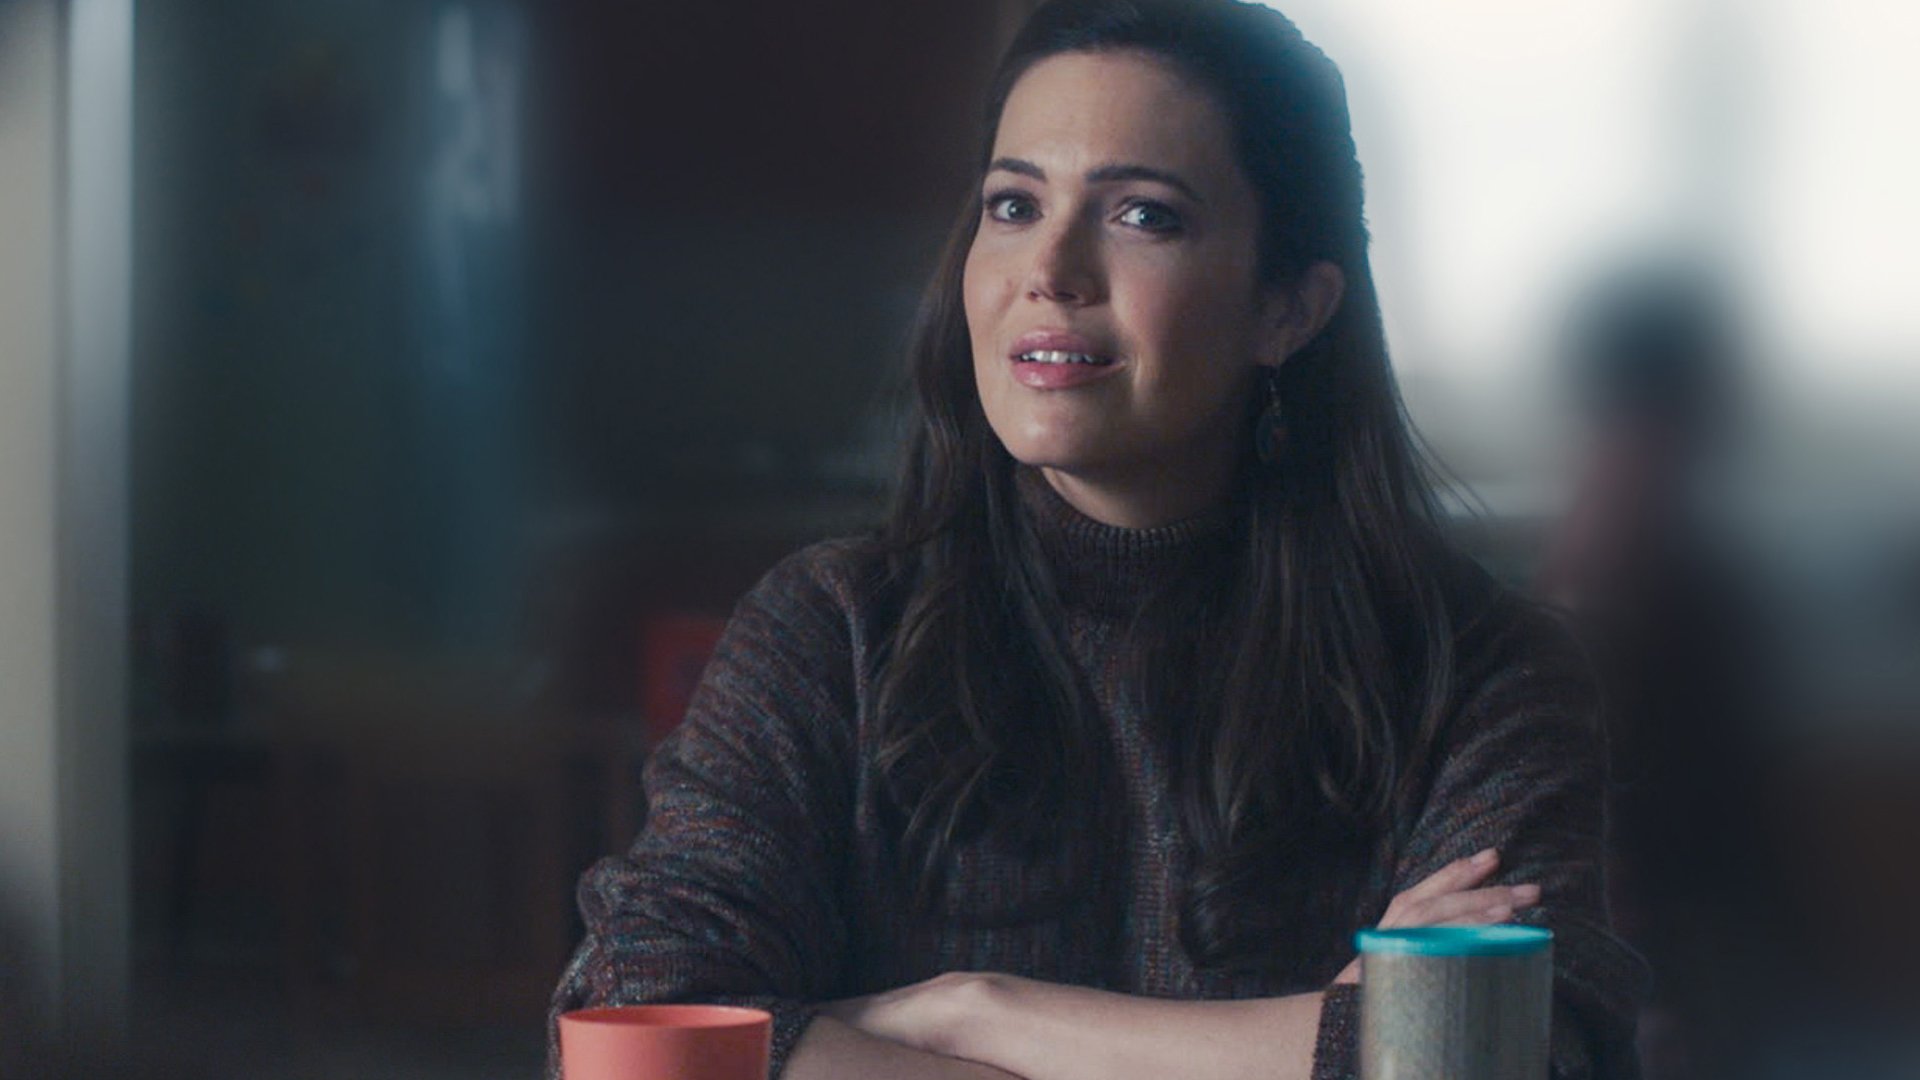 Mandy Moore as Rebecca crossing her arms in ‘This Is Us’ Season 5 Episode 13